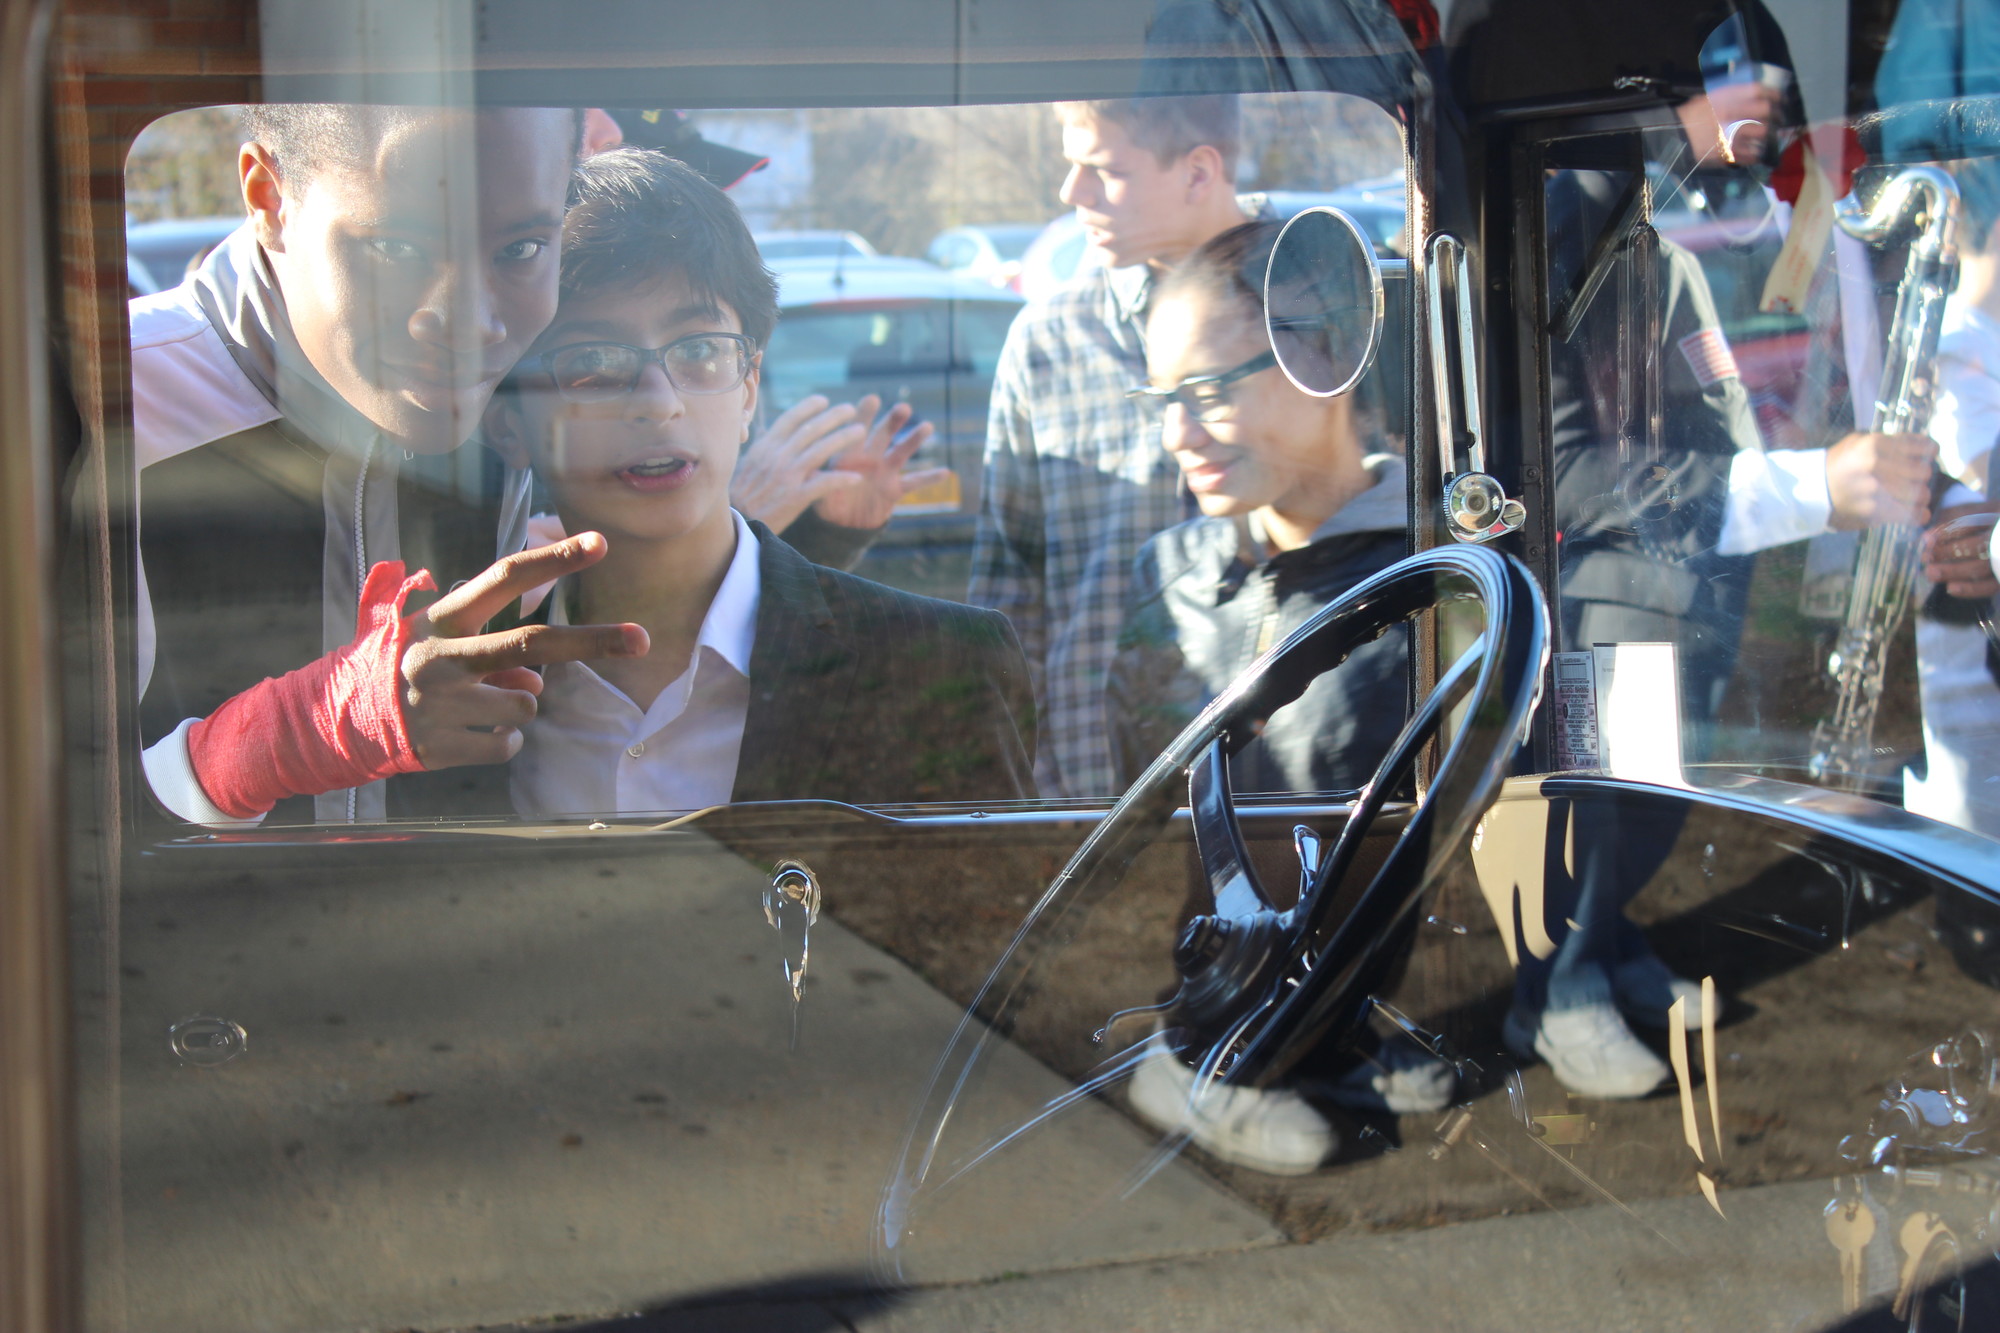 Students peered into the cars and learned about some of the distinguishing characteristics of early automobiles.